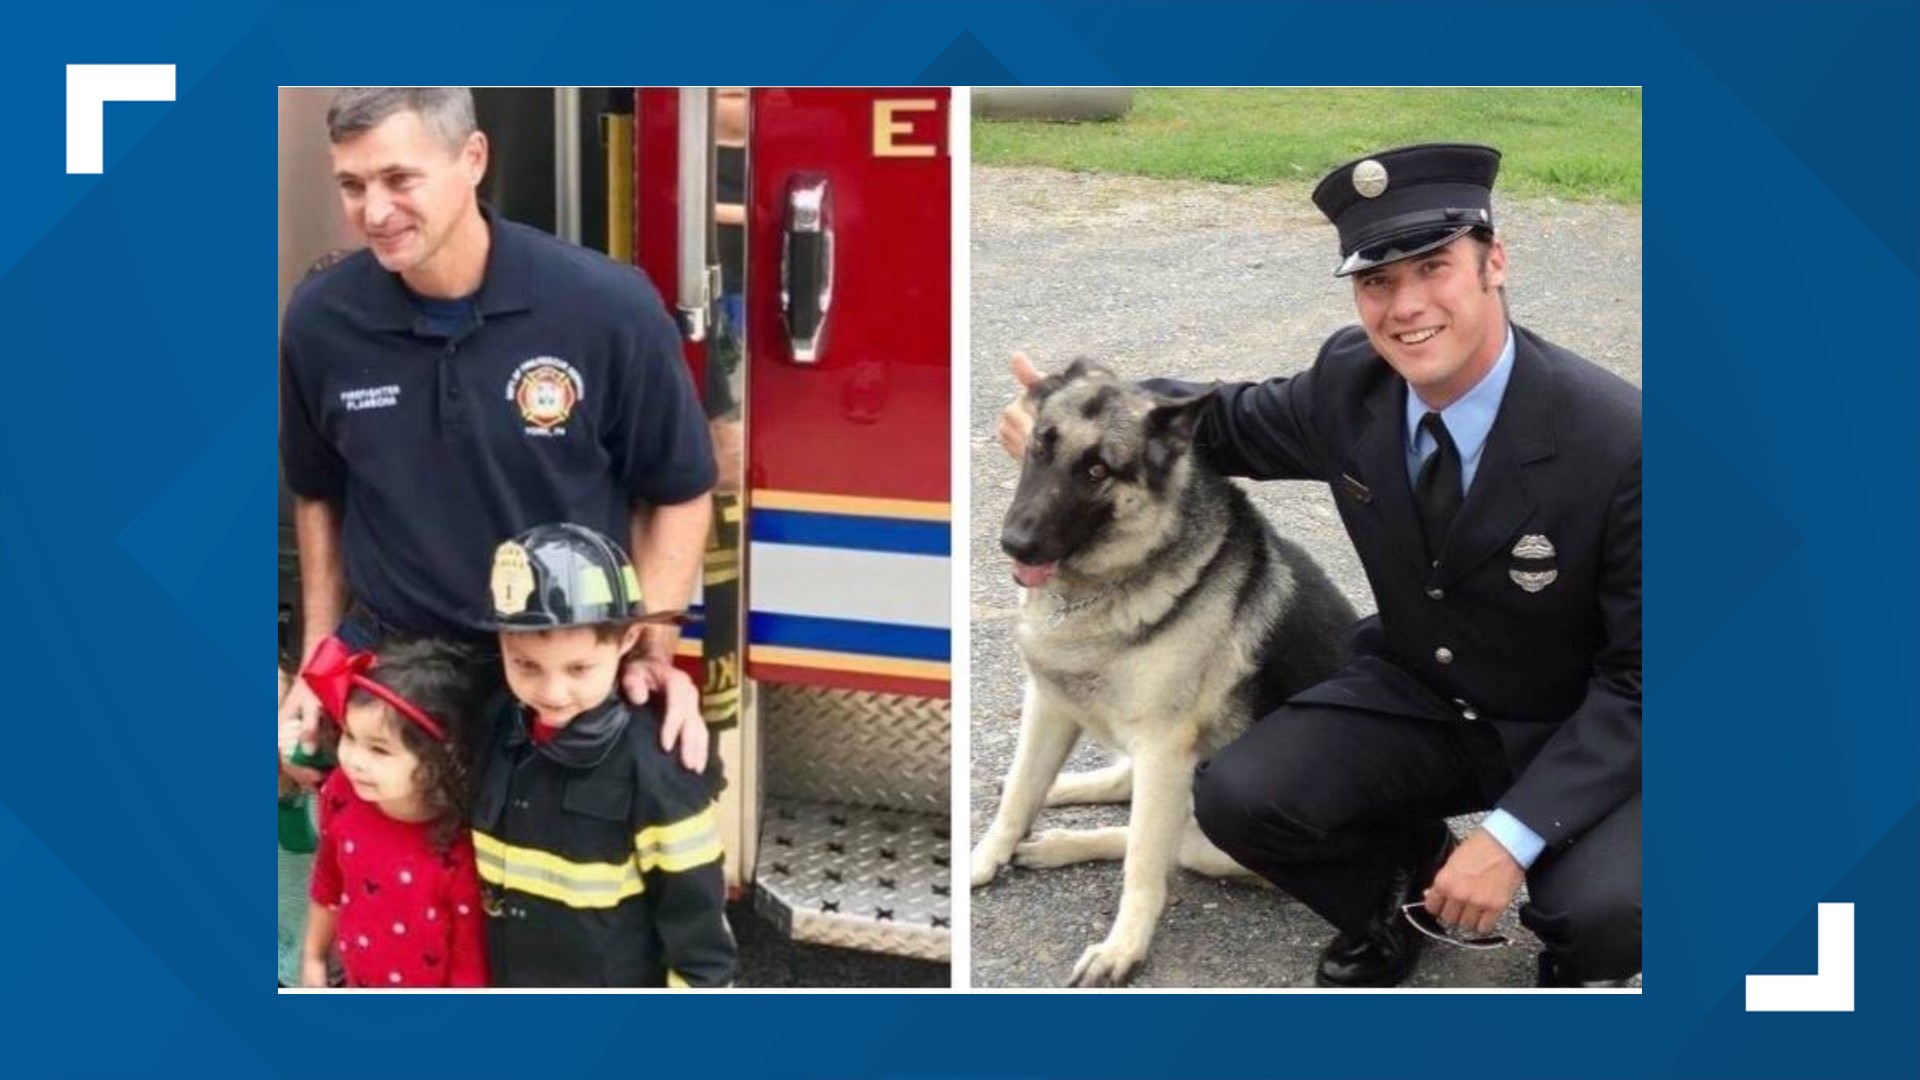 Today marks five years since the passing of York firefighters Ivan Flanscha and Zachary Anthony.